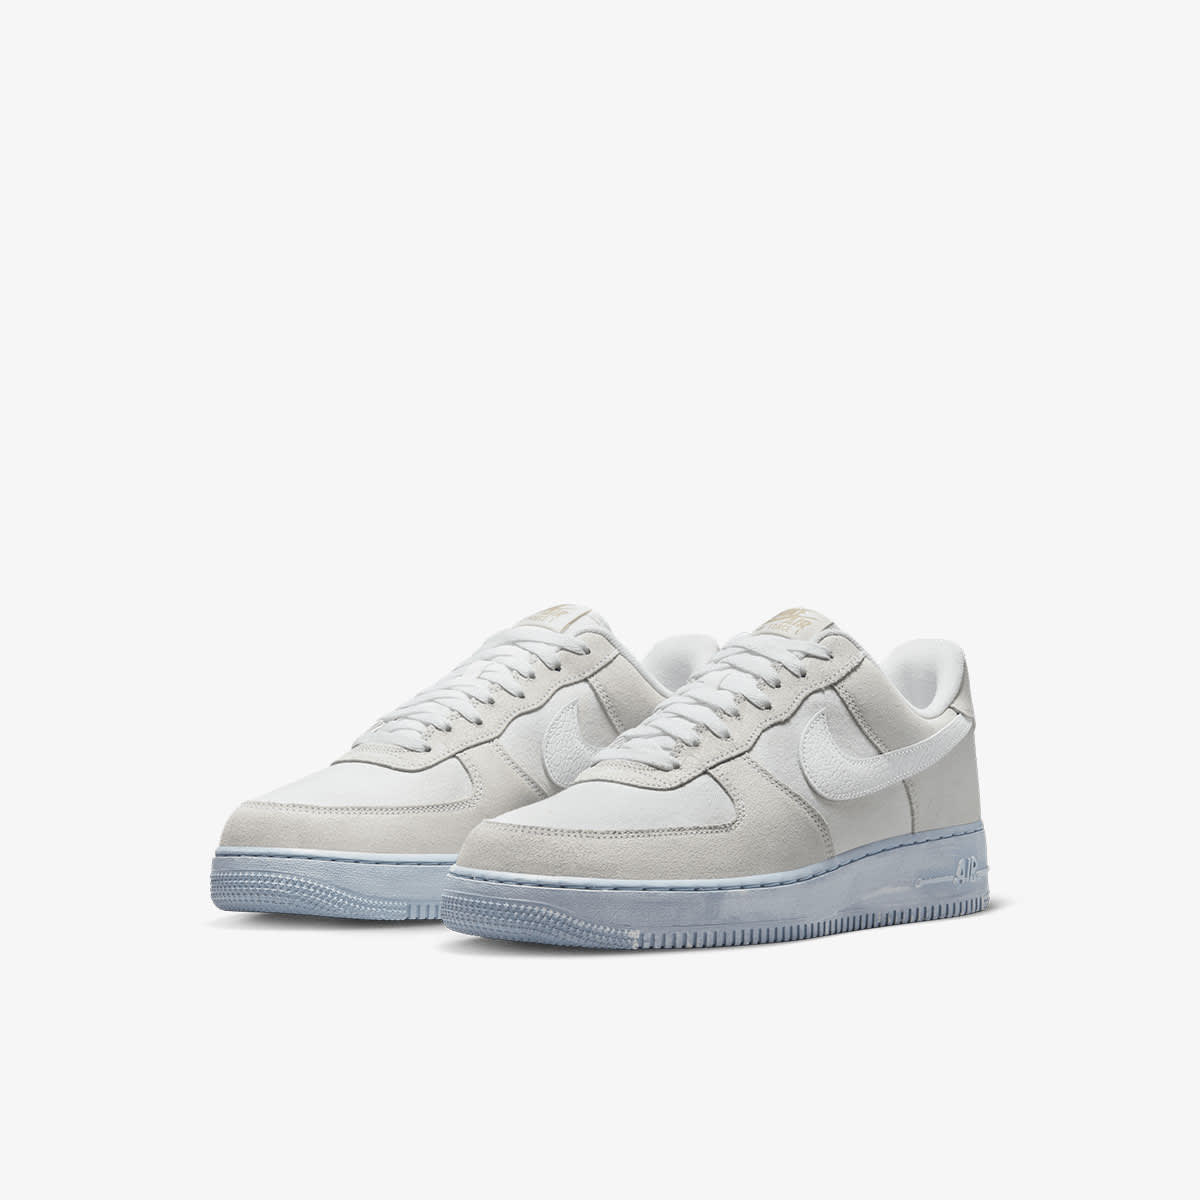 Nike Air Force 1 '07 LV8 EMB (Summit White) | END. Launches